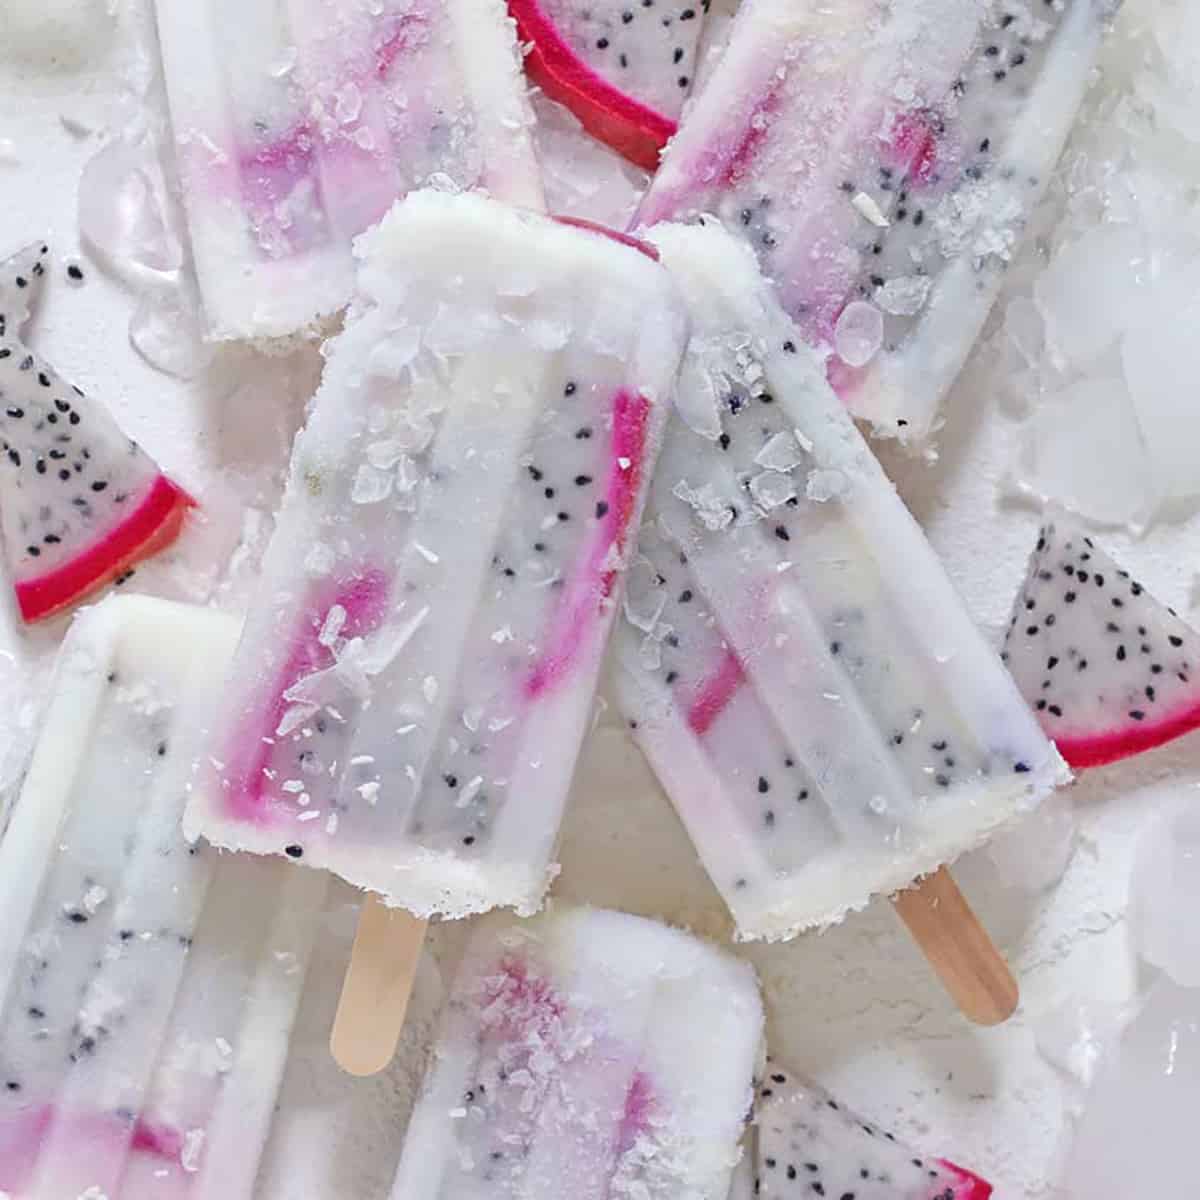 dragon fruit popsicles on a table, overhead view.